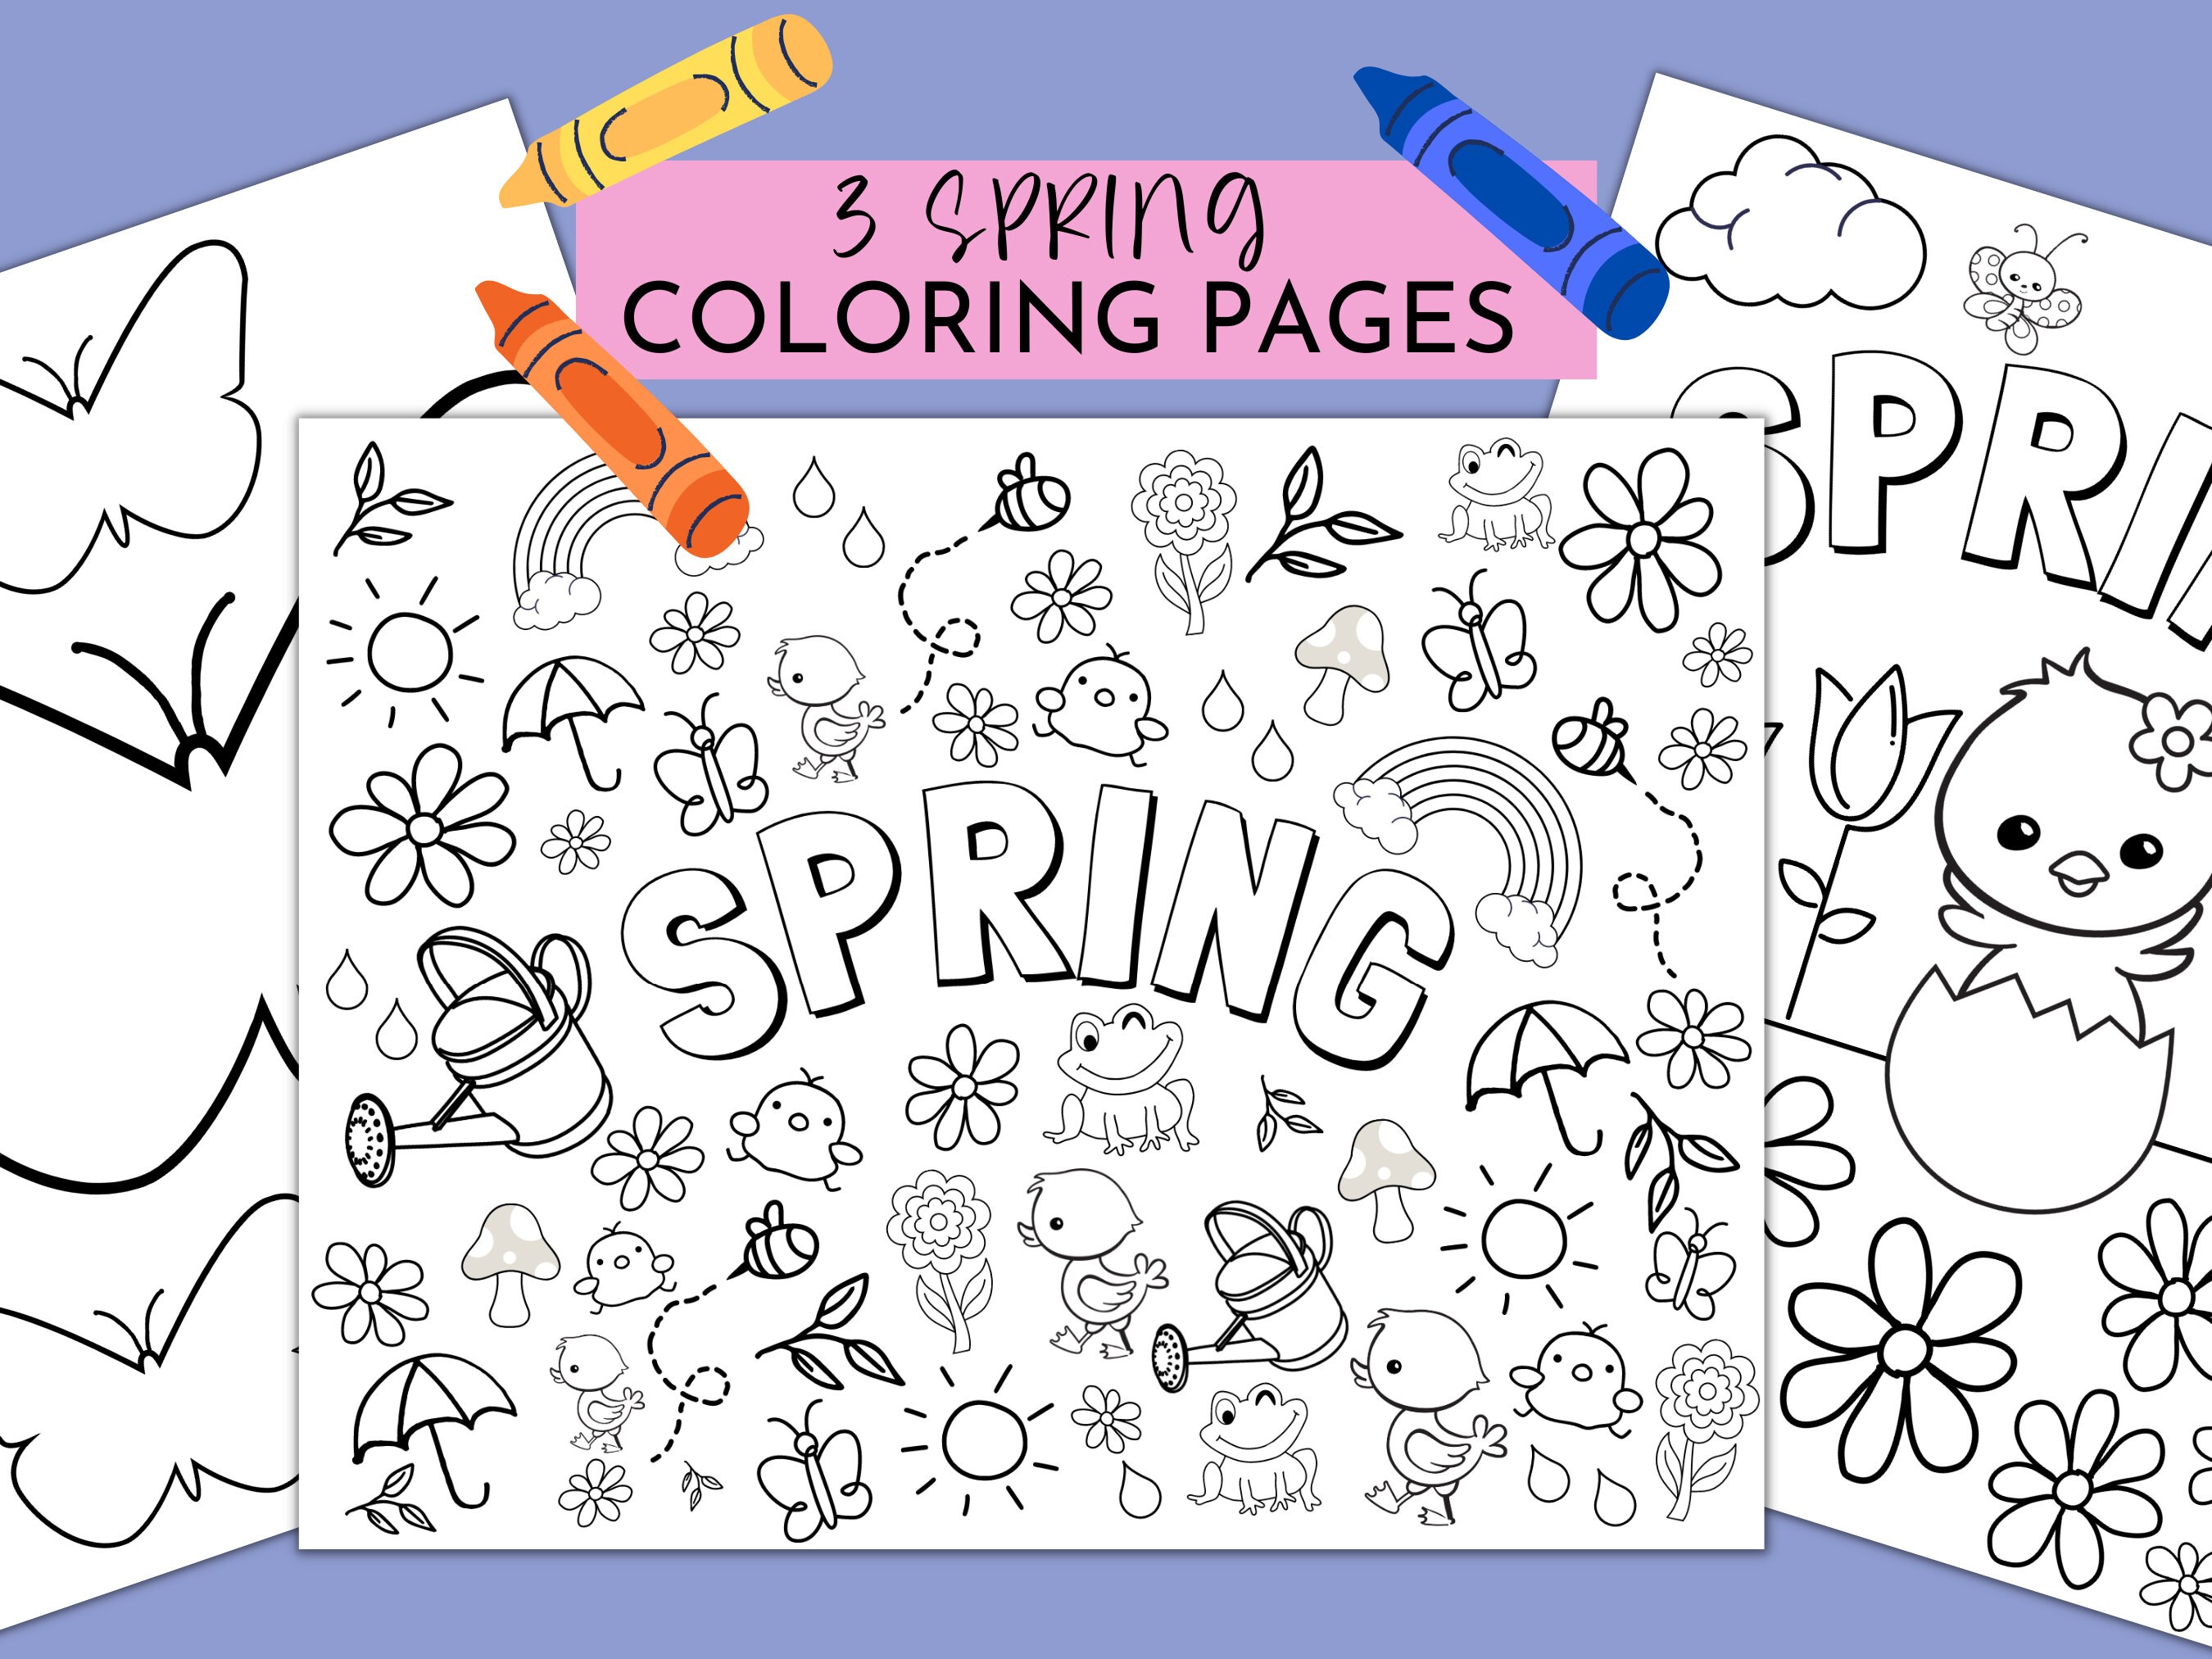 Spring coloring pages springtime kids activity pages coloring bundle printable instant download